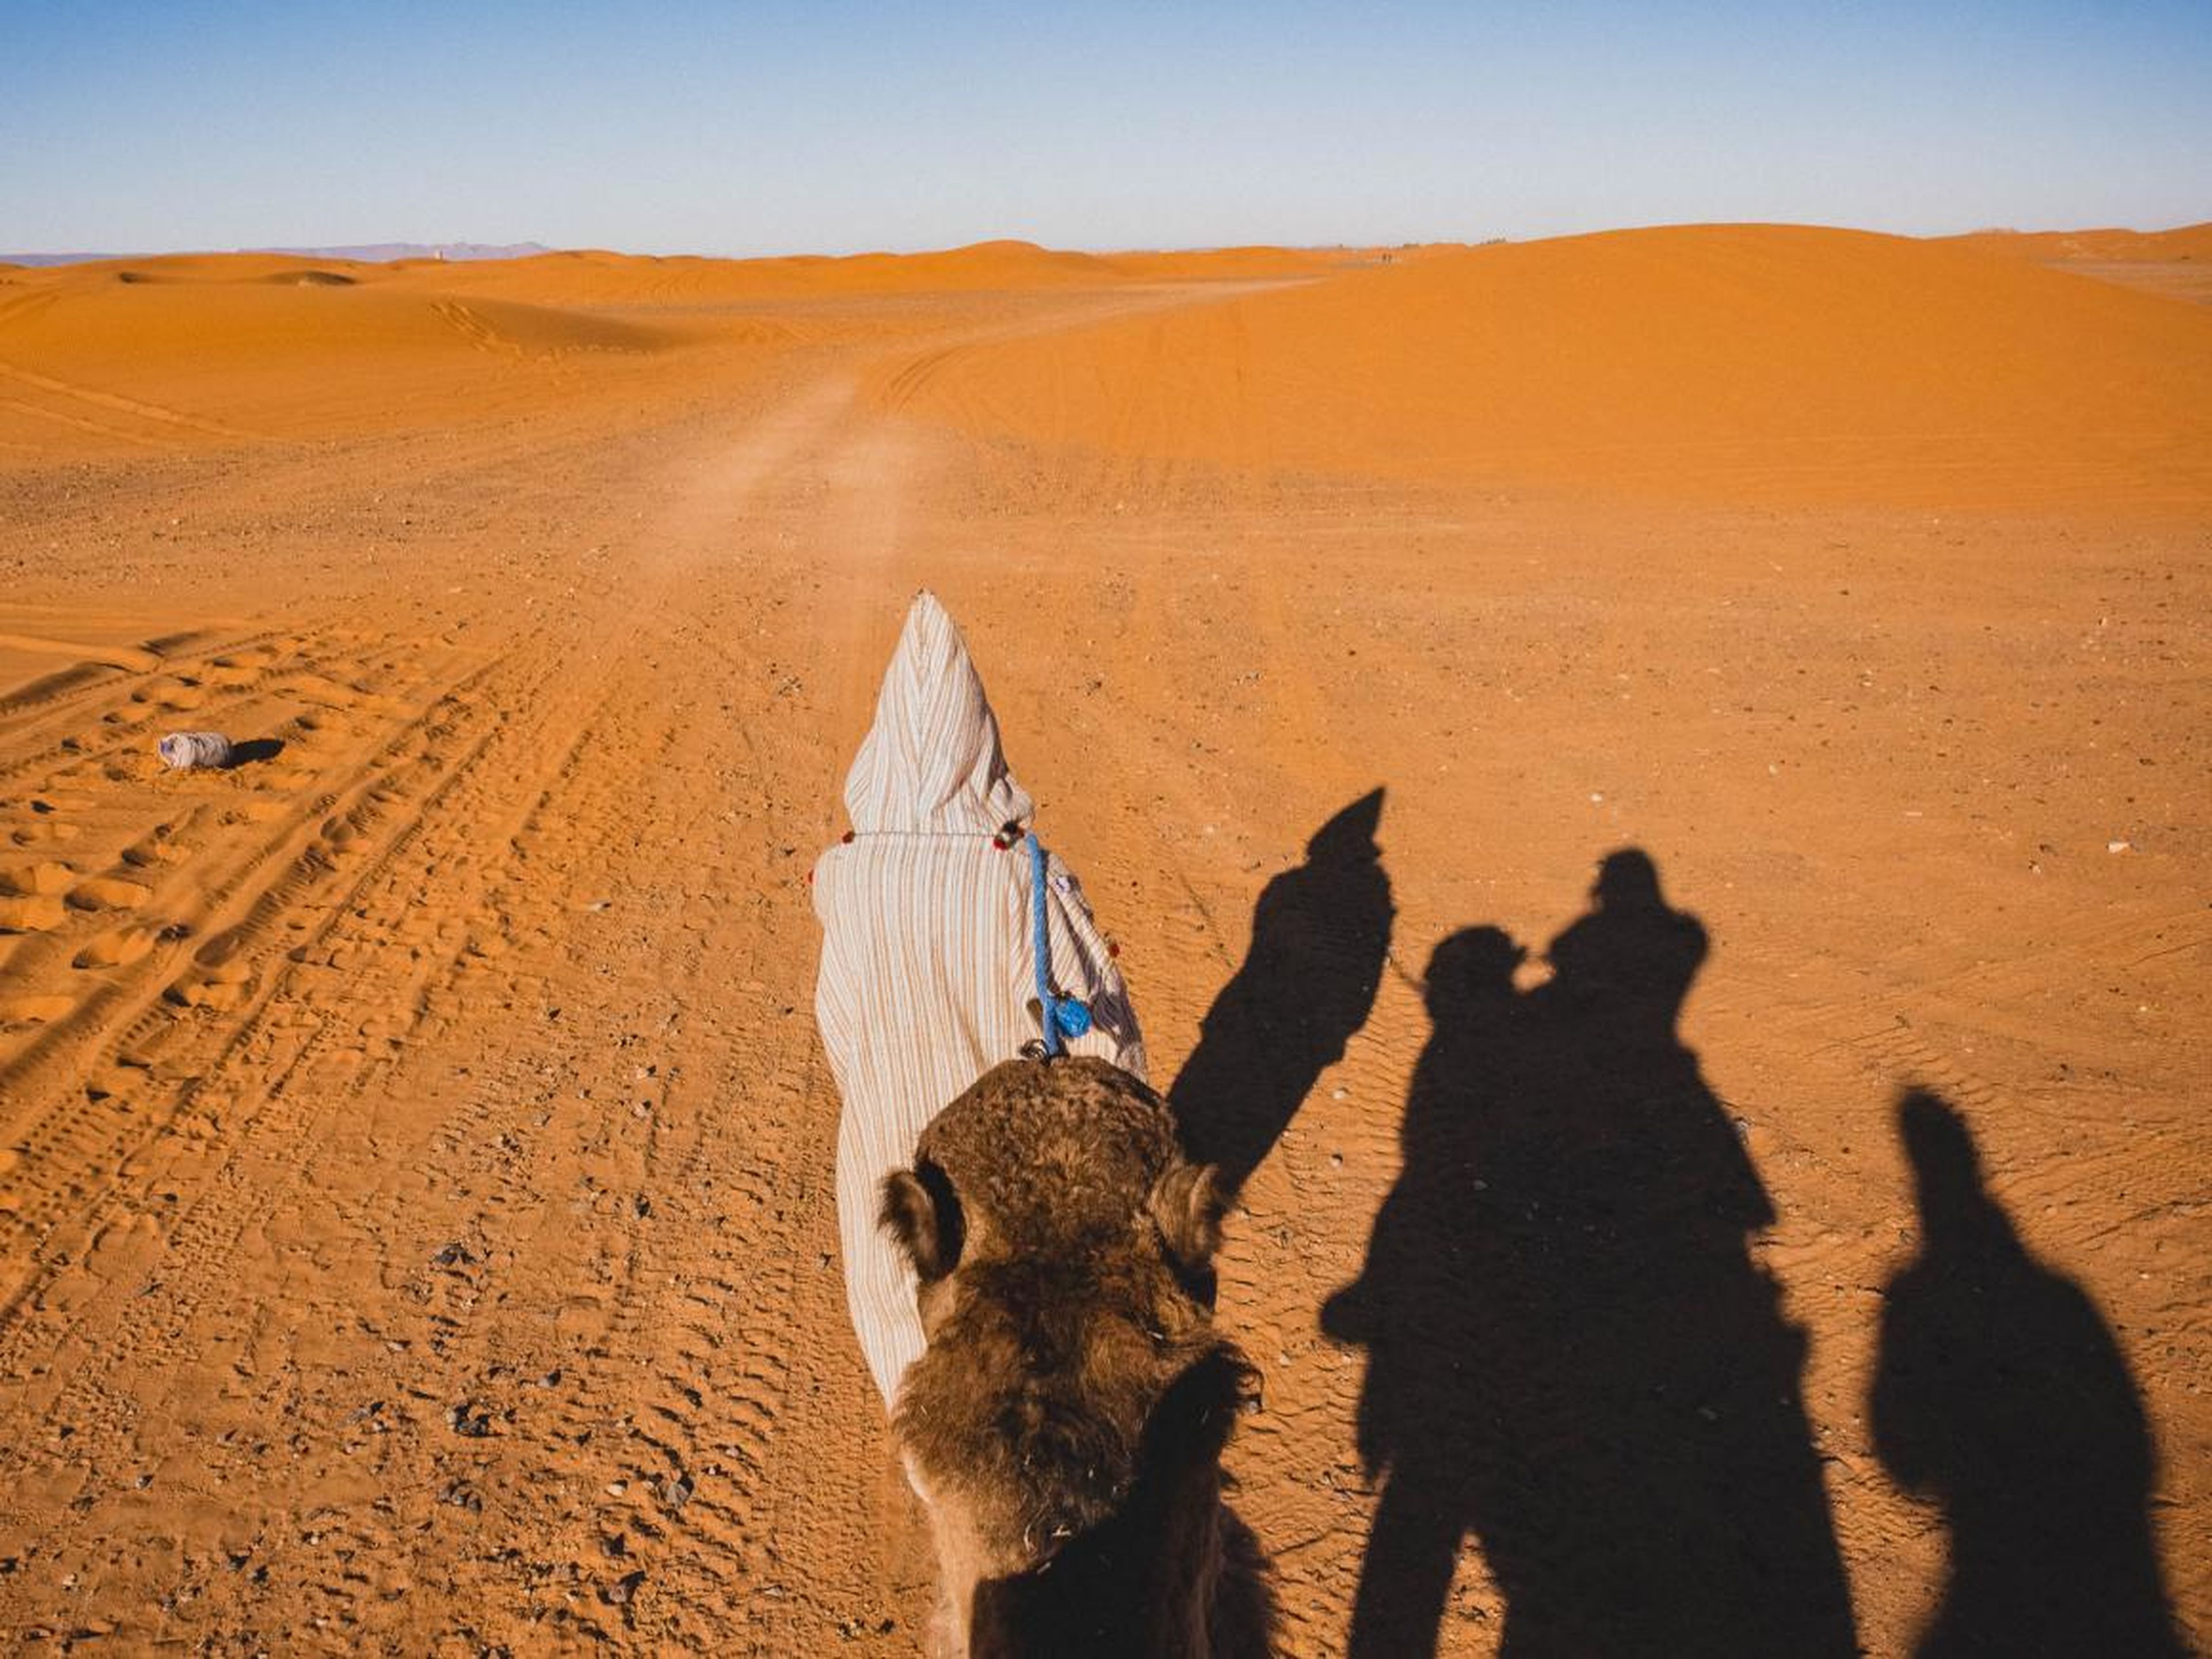 When I got to Morocco, I knew that I needed to visit Erg Chebbi, possibly the most iconic way to see the Sahara. Erg Chebbi is one of Morocco's many ergs, or seas of sand dunes. It is often used for films because of its stunning